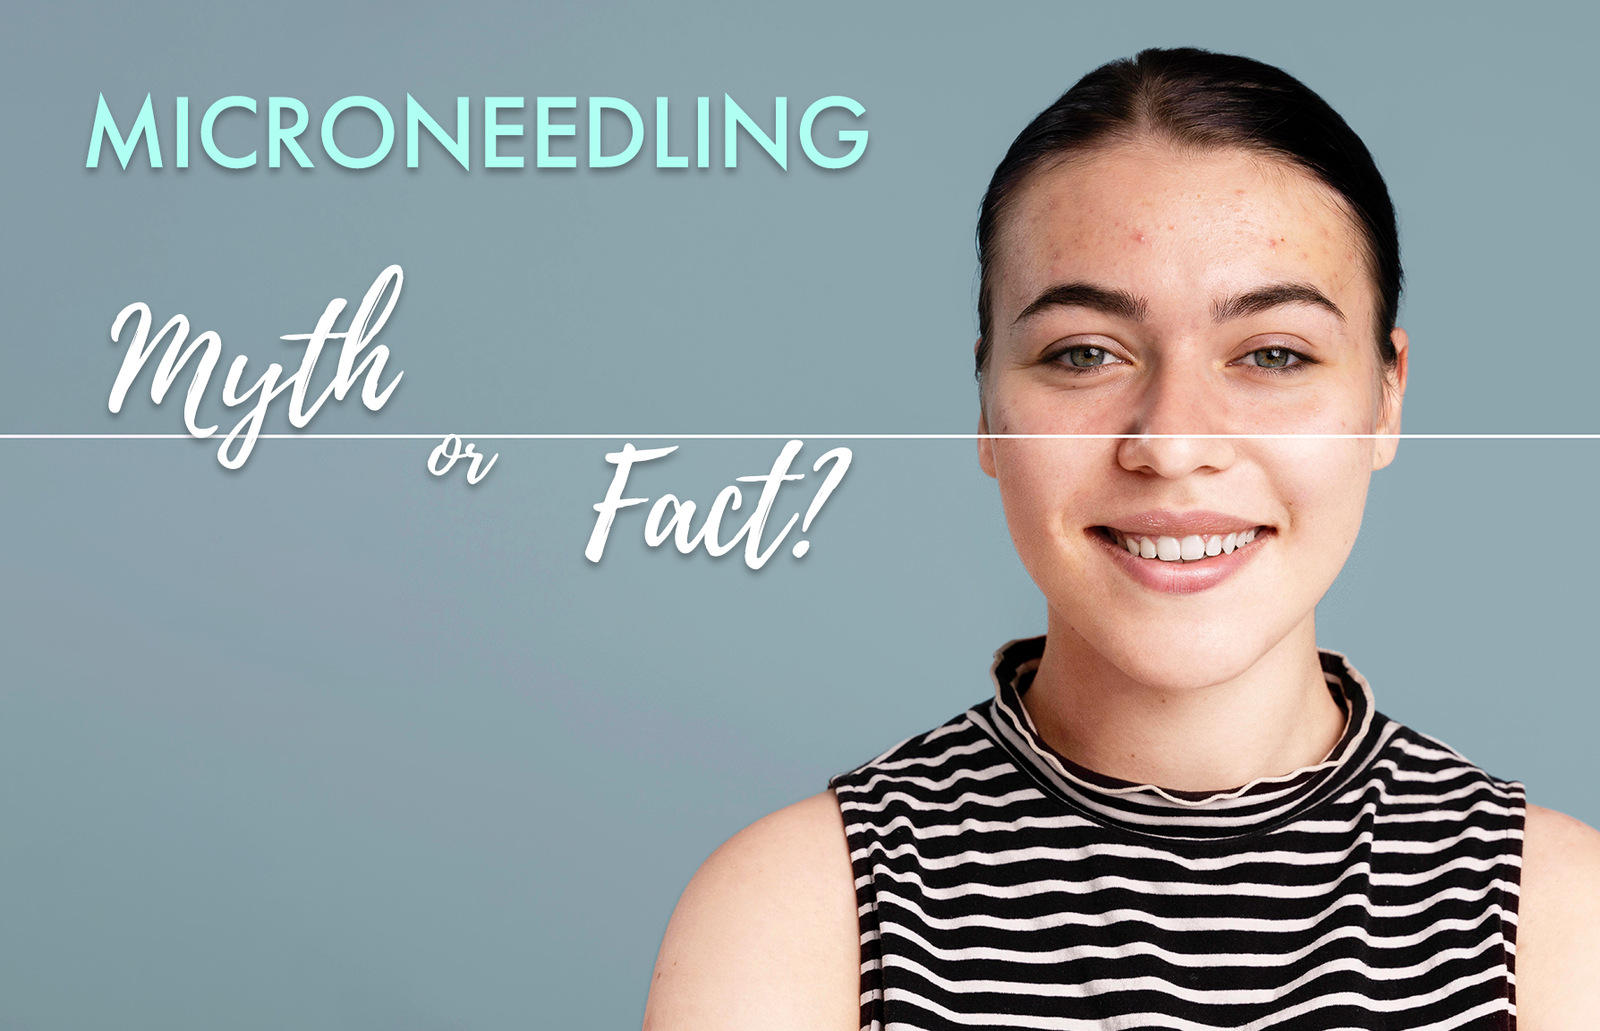 Common myths about microneedling